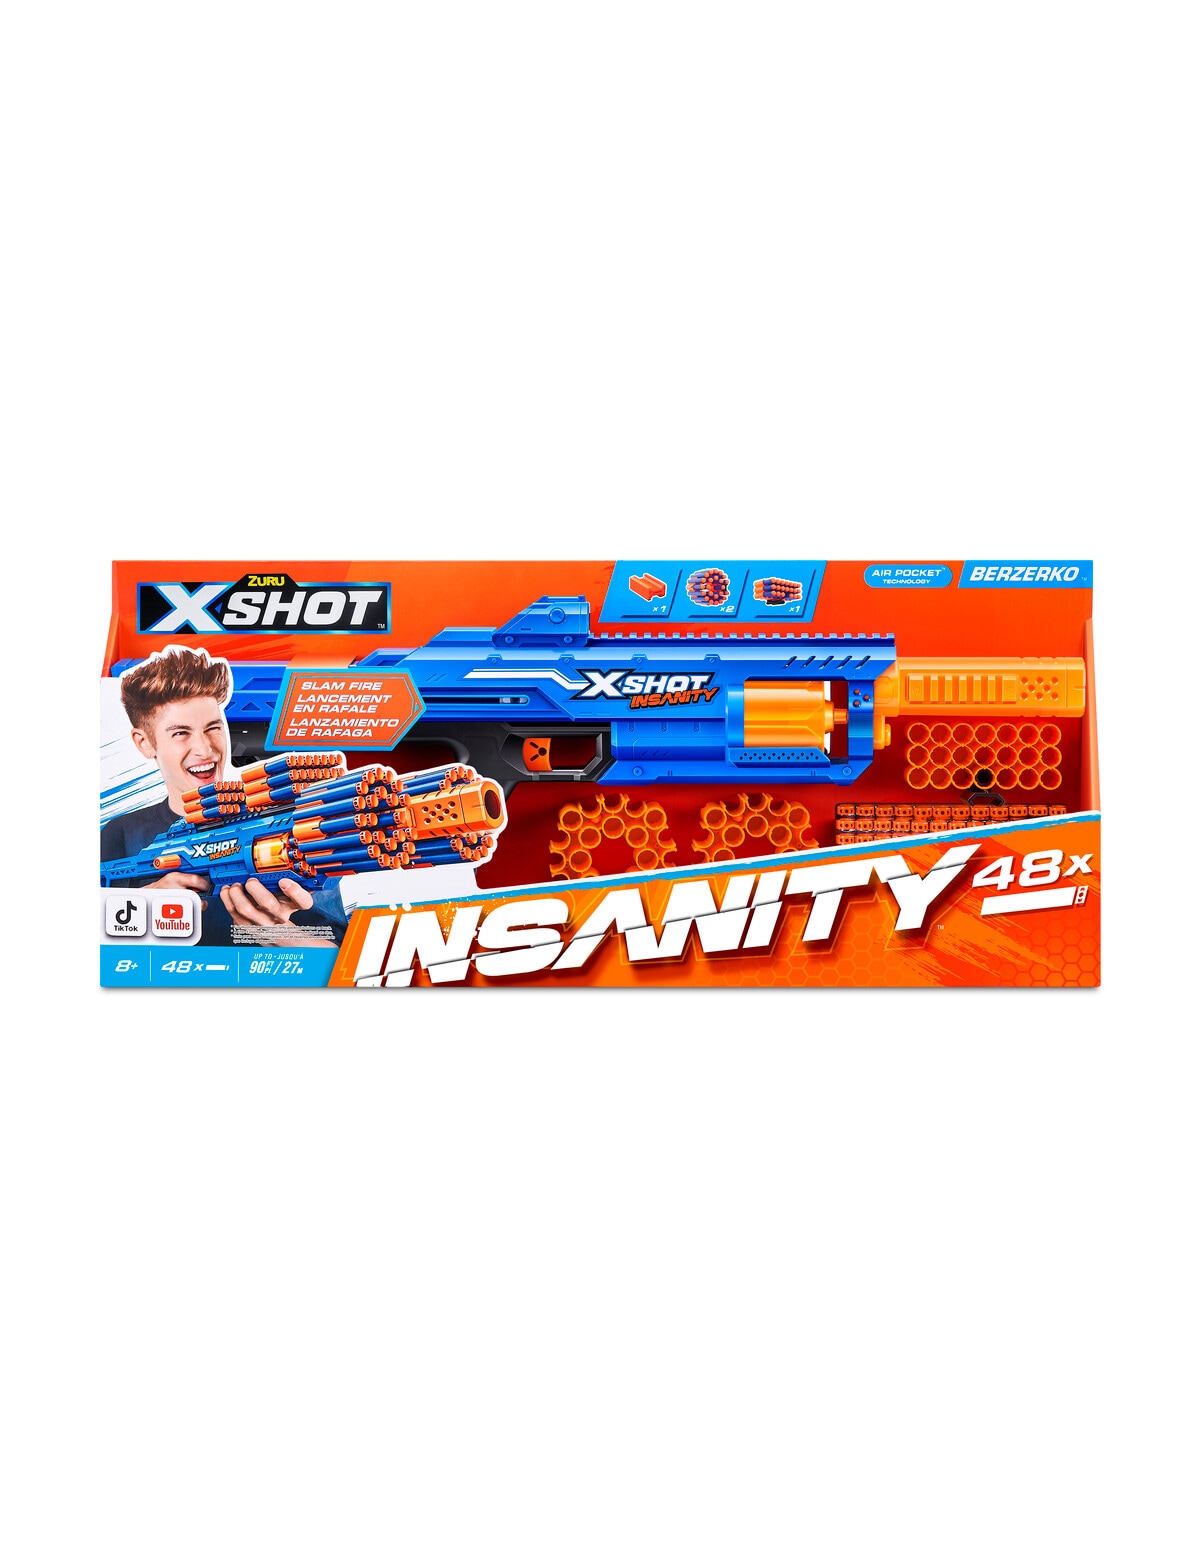 X-Shot Insanity - Motorized Rage Fire 🔥 This ones my favourite